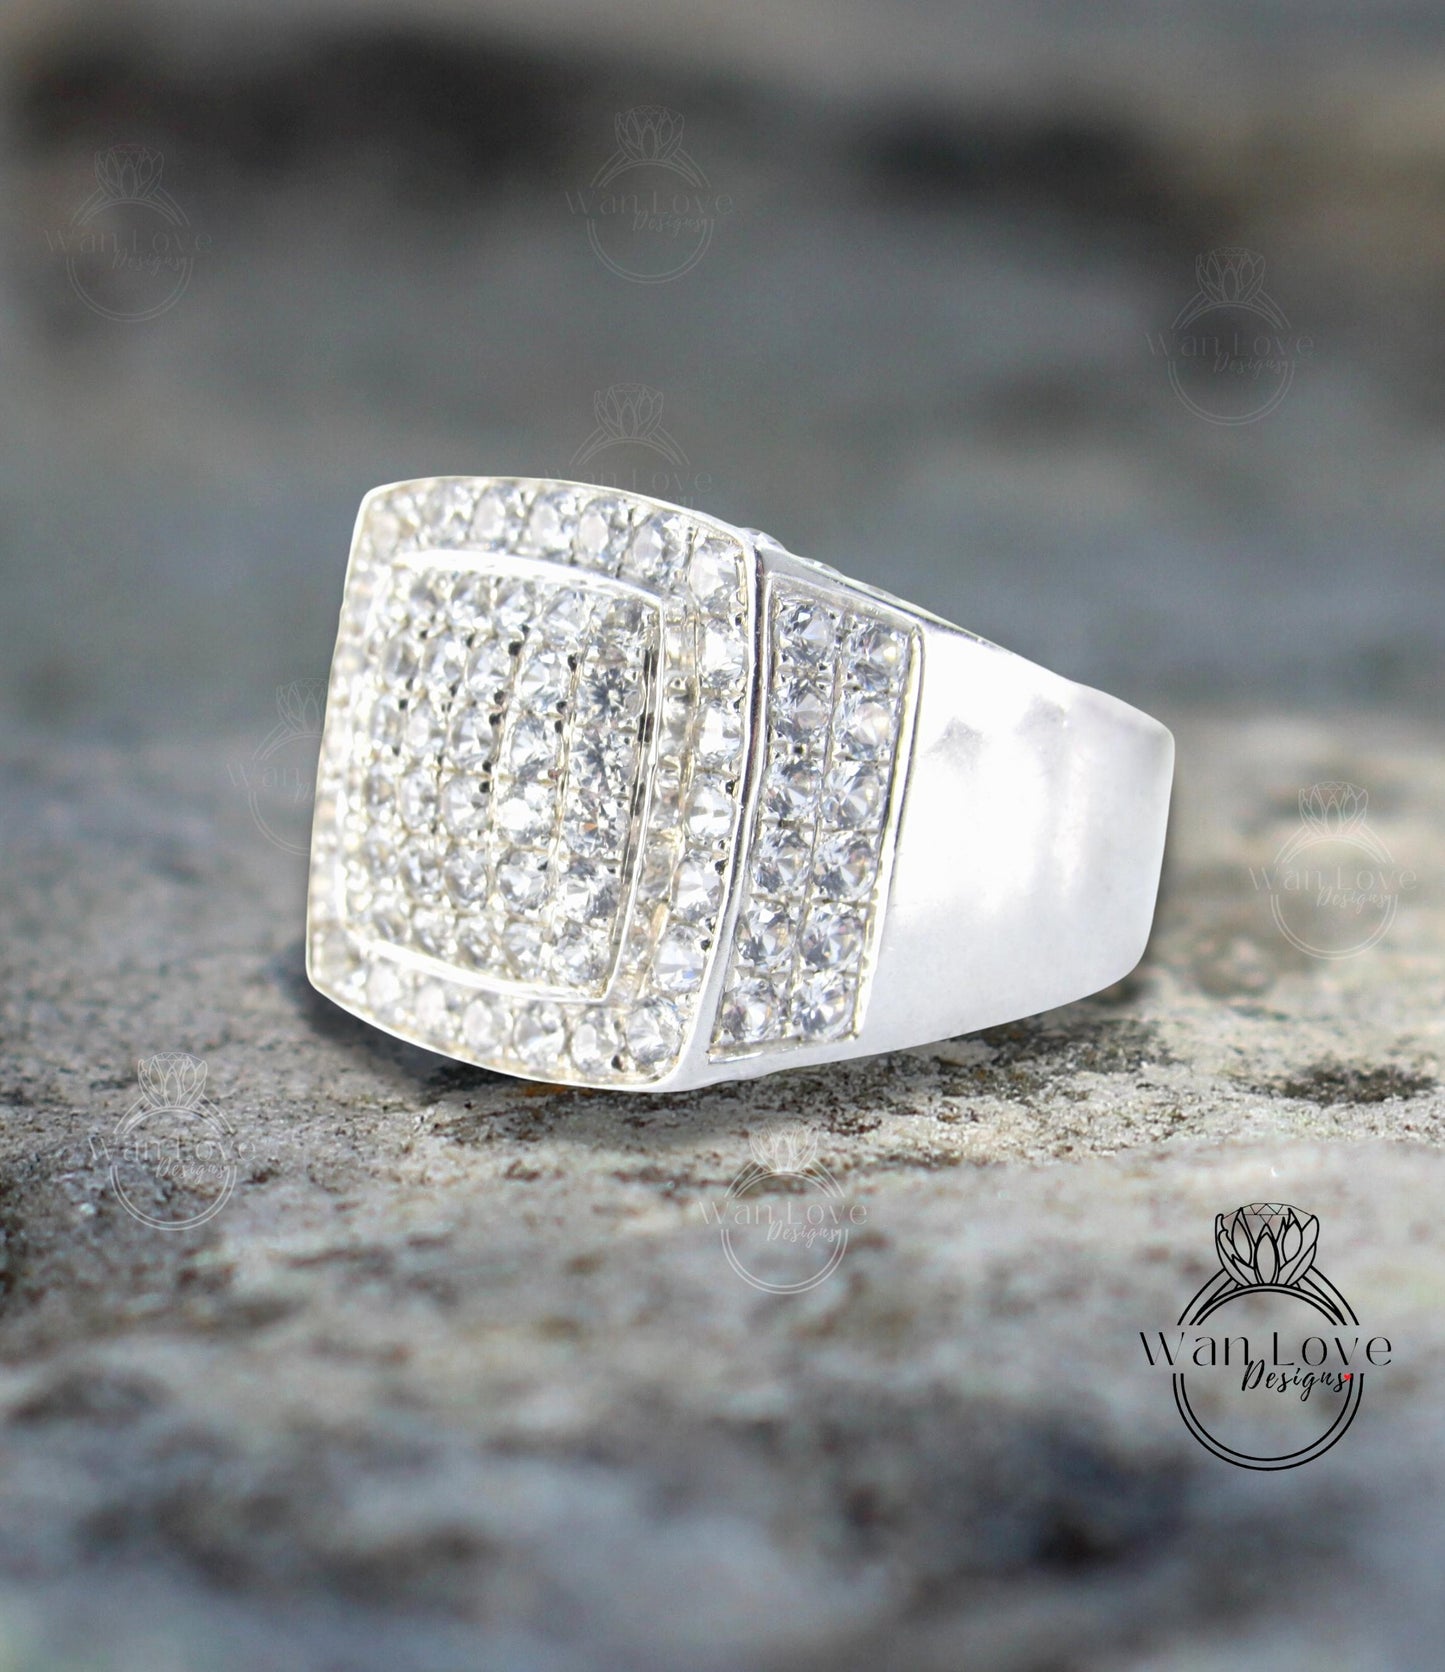 White Sapphire Large Pave Wedding Bands-Mens Ring-3.7ct 2mm-Silver Rhodium-Engagement-Pinky-Anniversary Gift-Thick Shank-Ready to ship